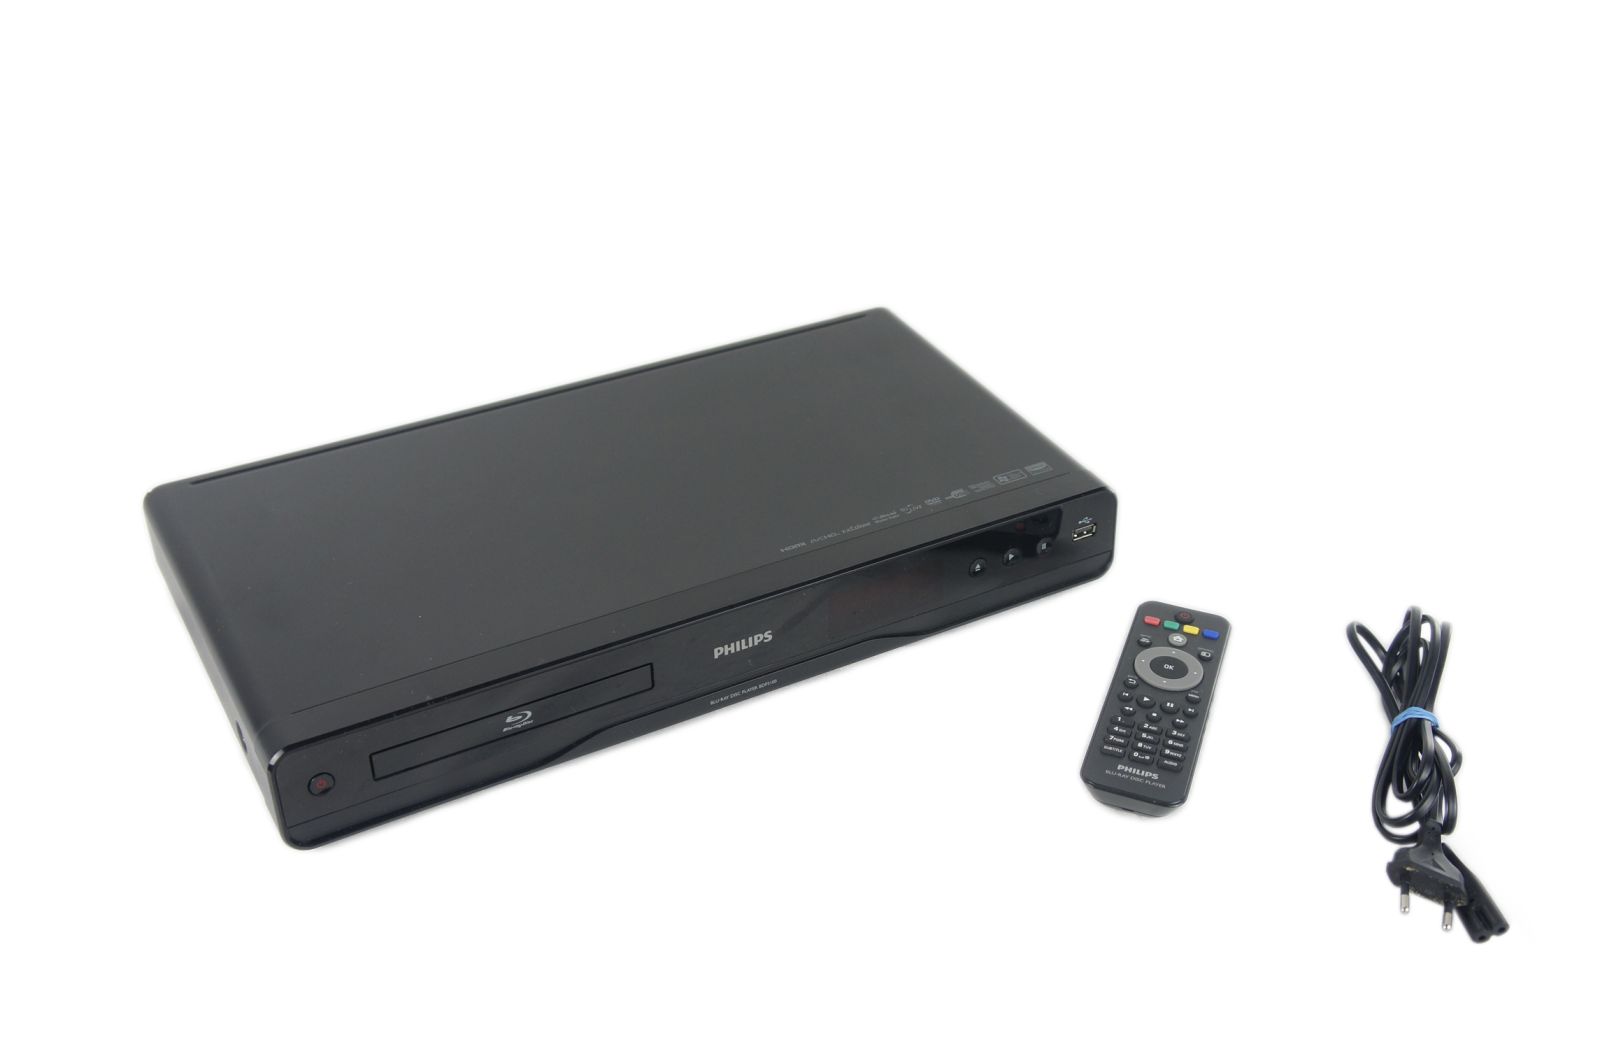 Philips_BDP3100-12_Blu_Ray_Player_03